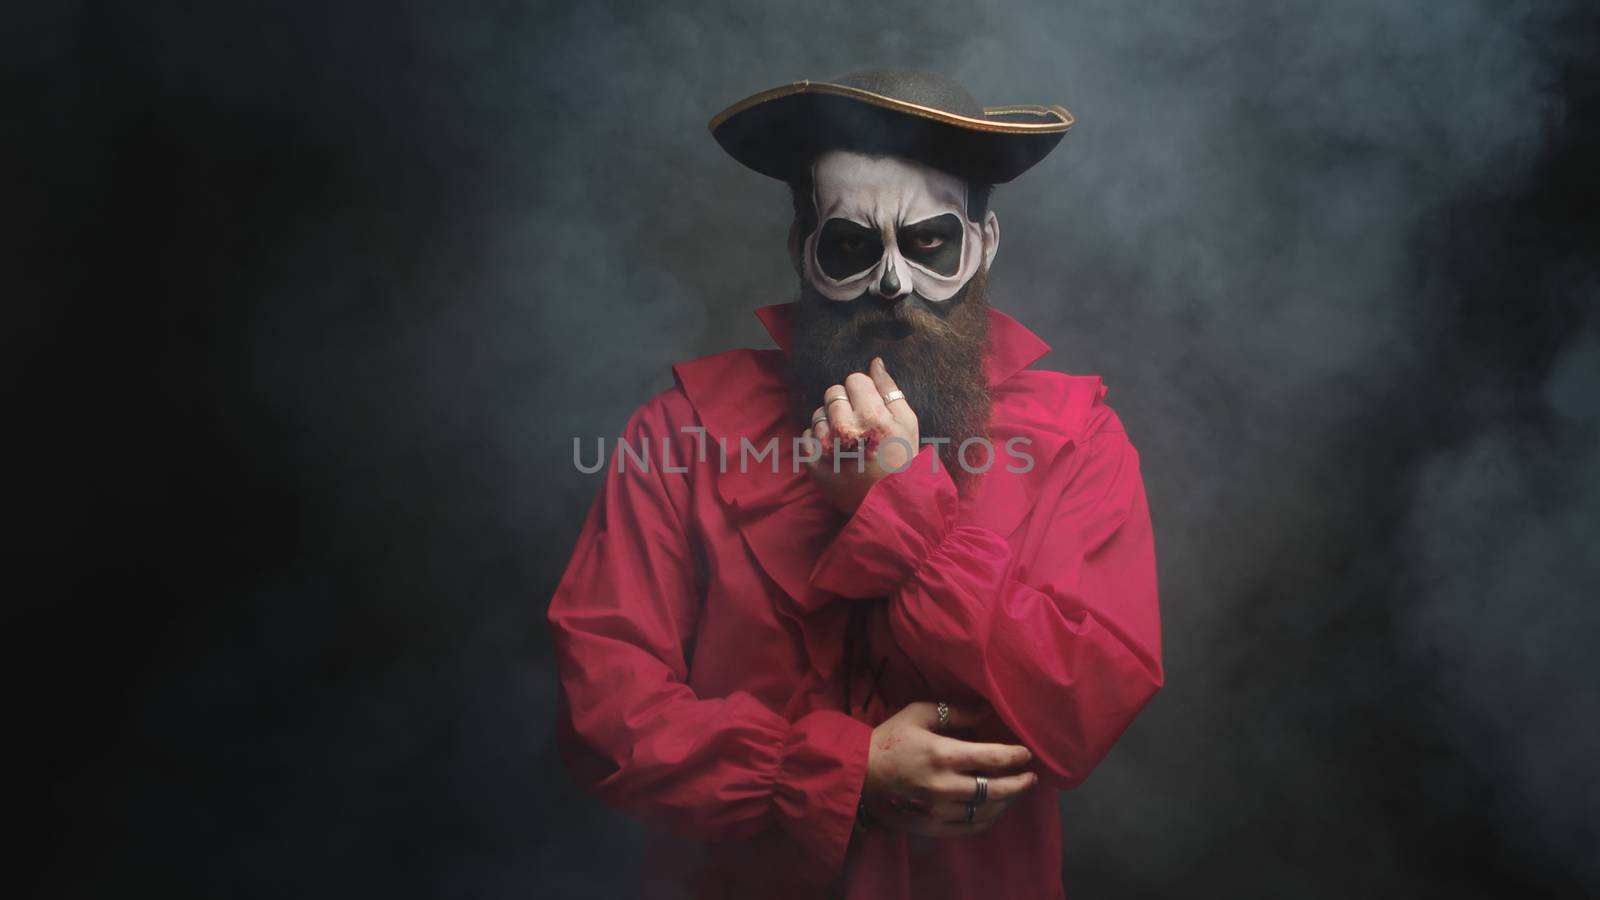 Man with long beard dressed up like a pirate for halloween over a black background with smoke coming out.